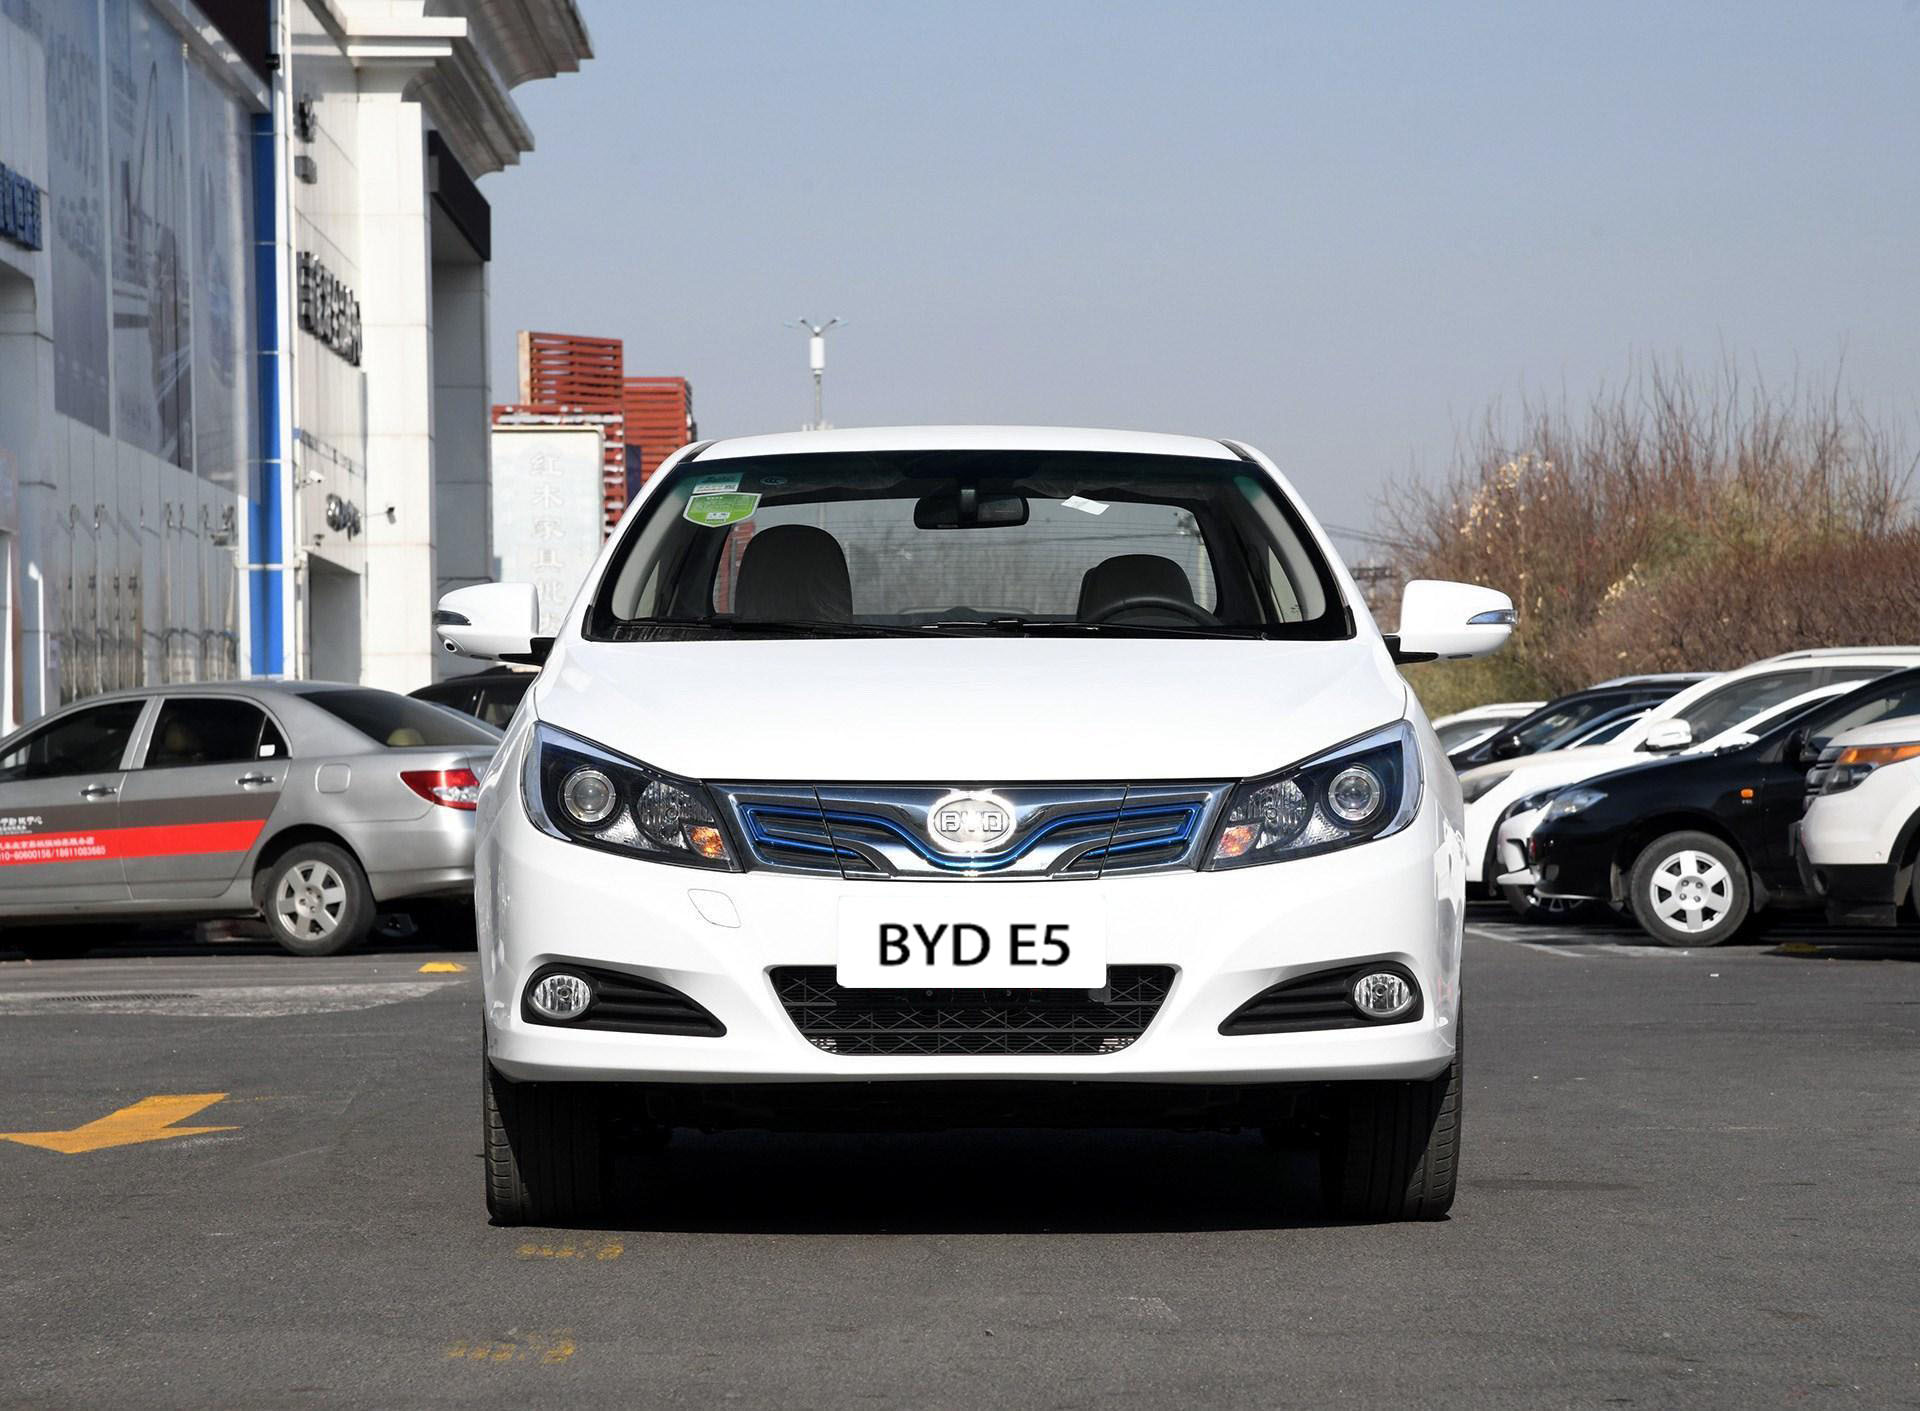 Wholesale Used BYD E5 Cheap New Energy Taxi Export Trade - BYD - 1